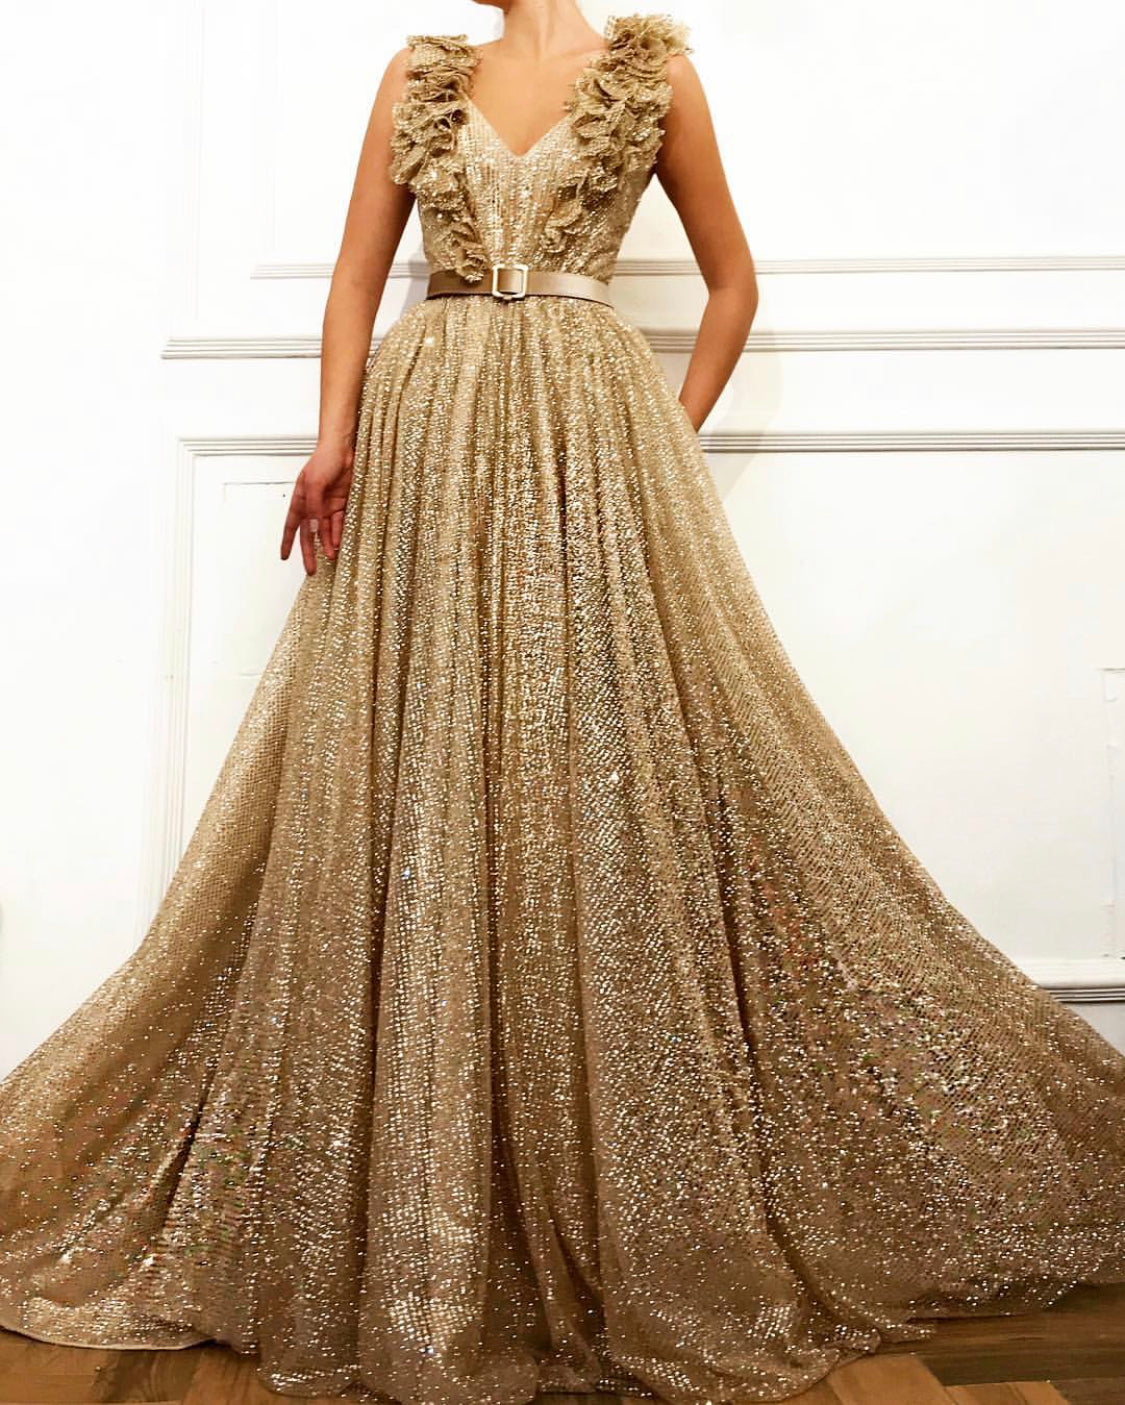 Gold A-Line dress with no sleeves, belt and embroidery